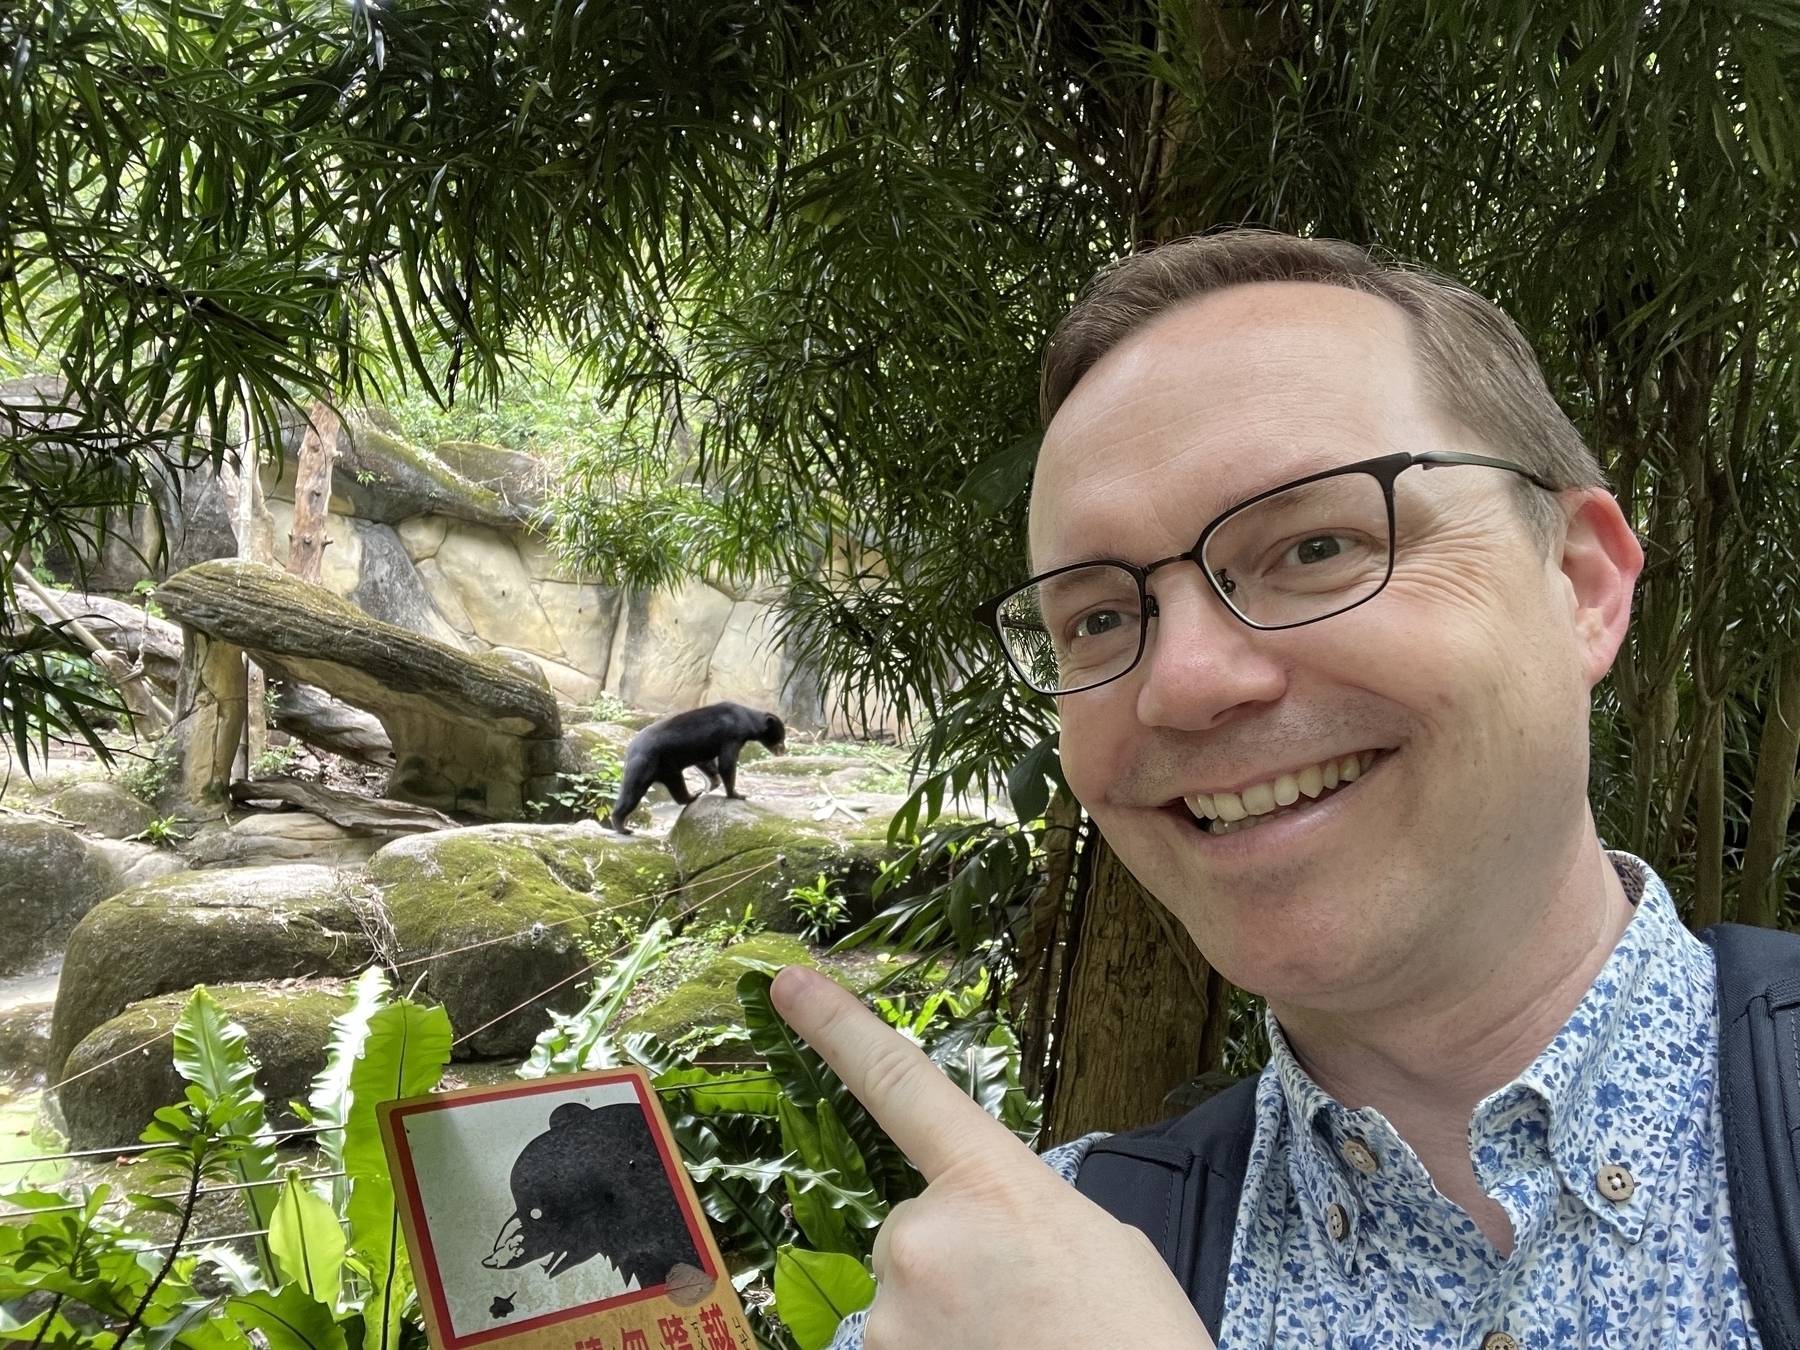 Chad selfie with a sun bear in the distance